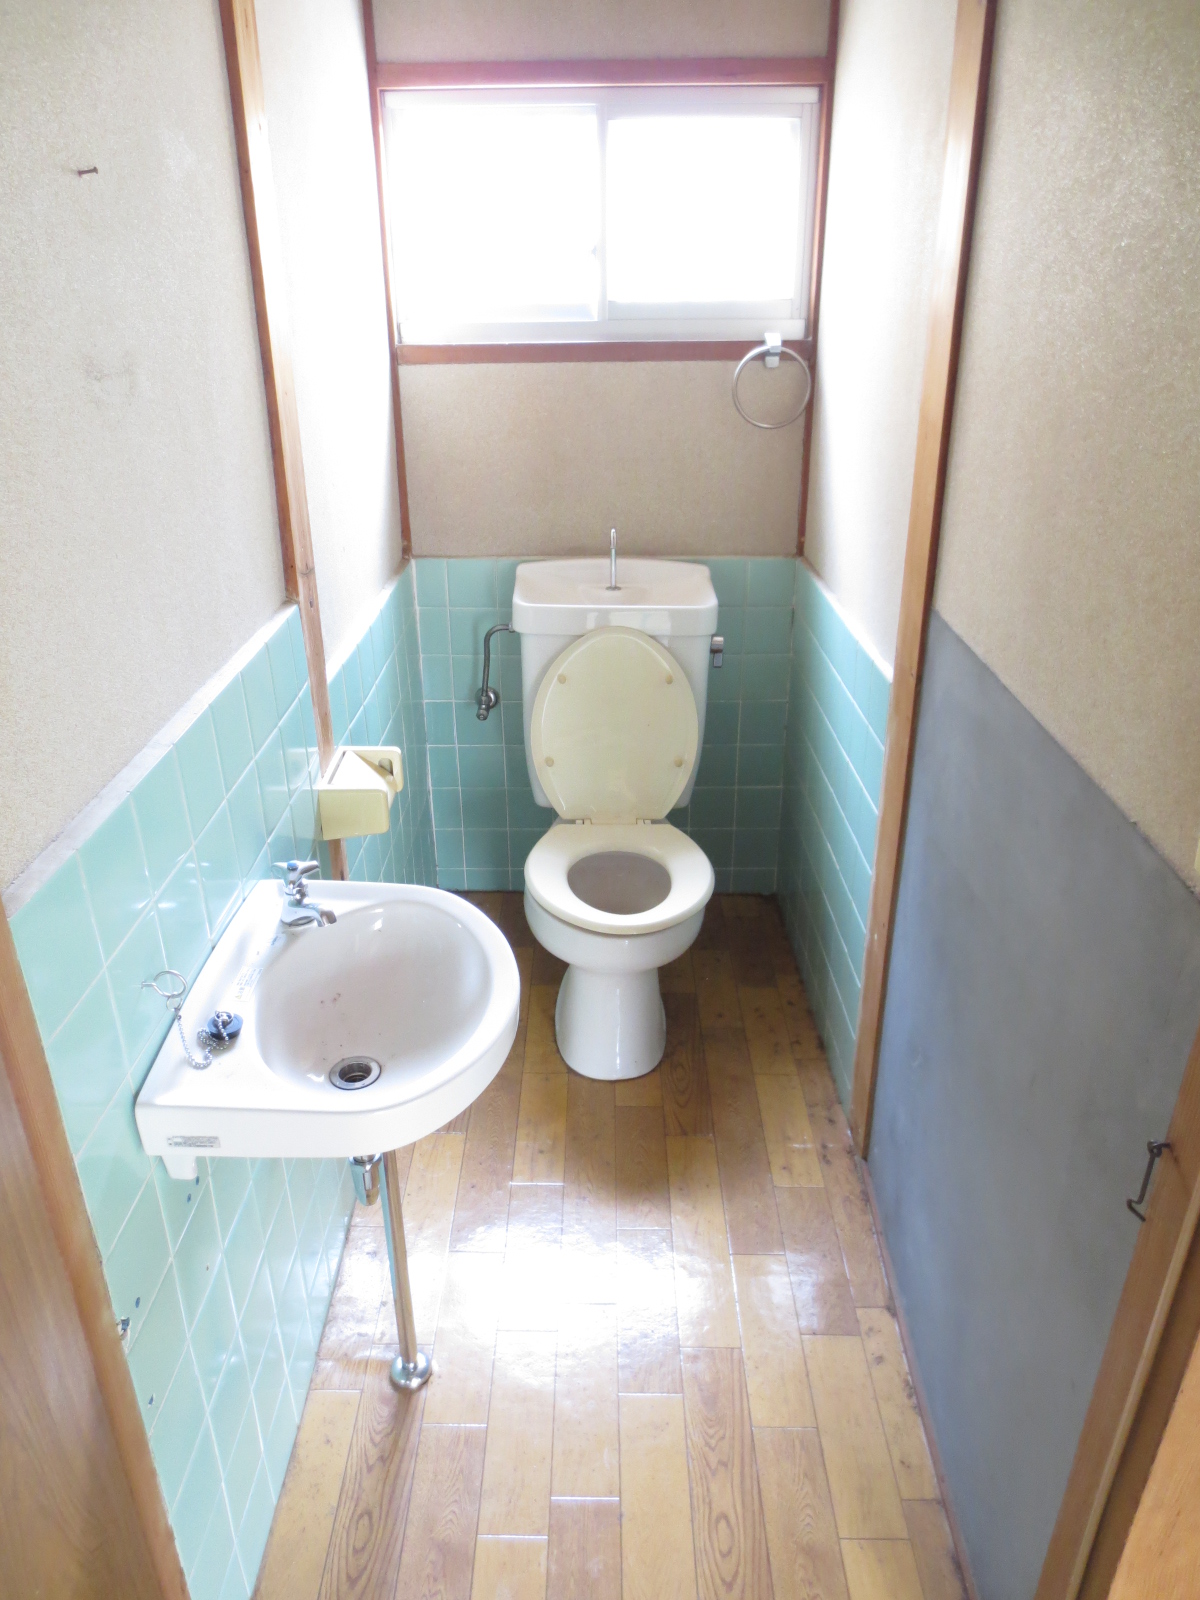 Toilet. It is a wash basin and a set.